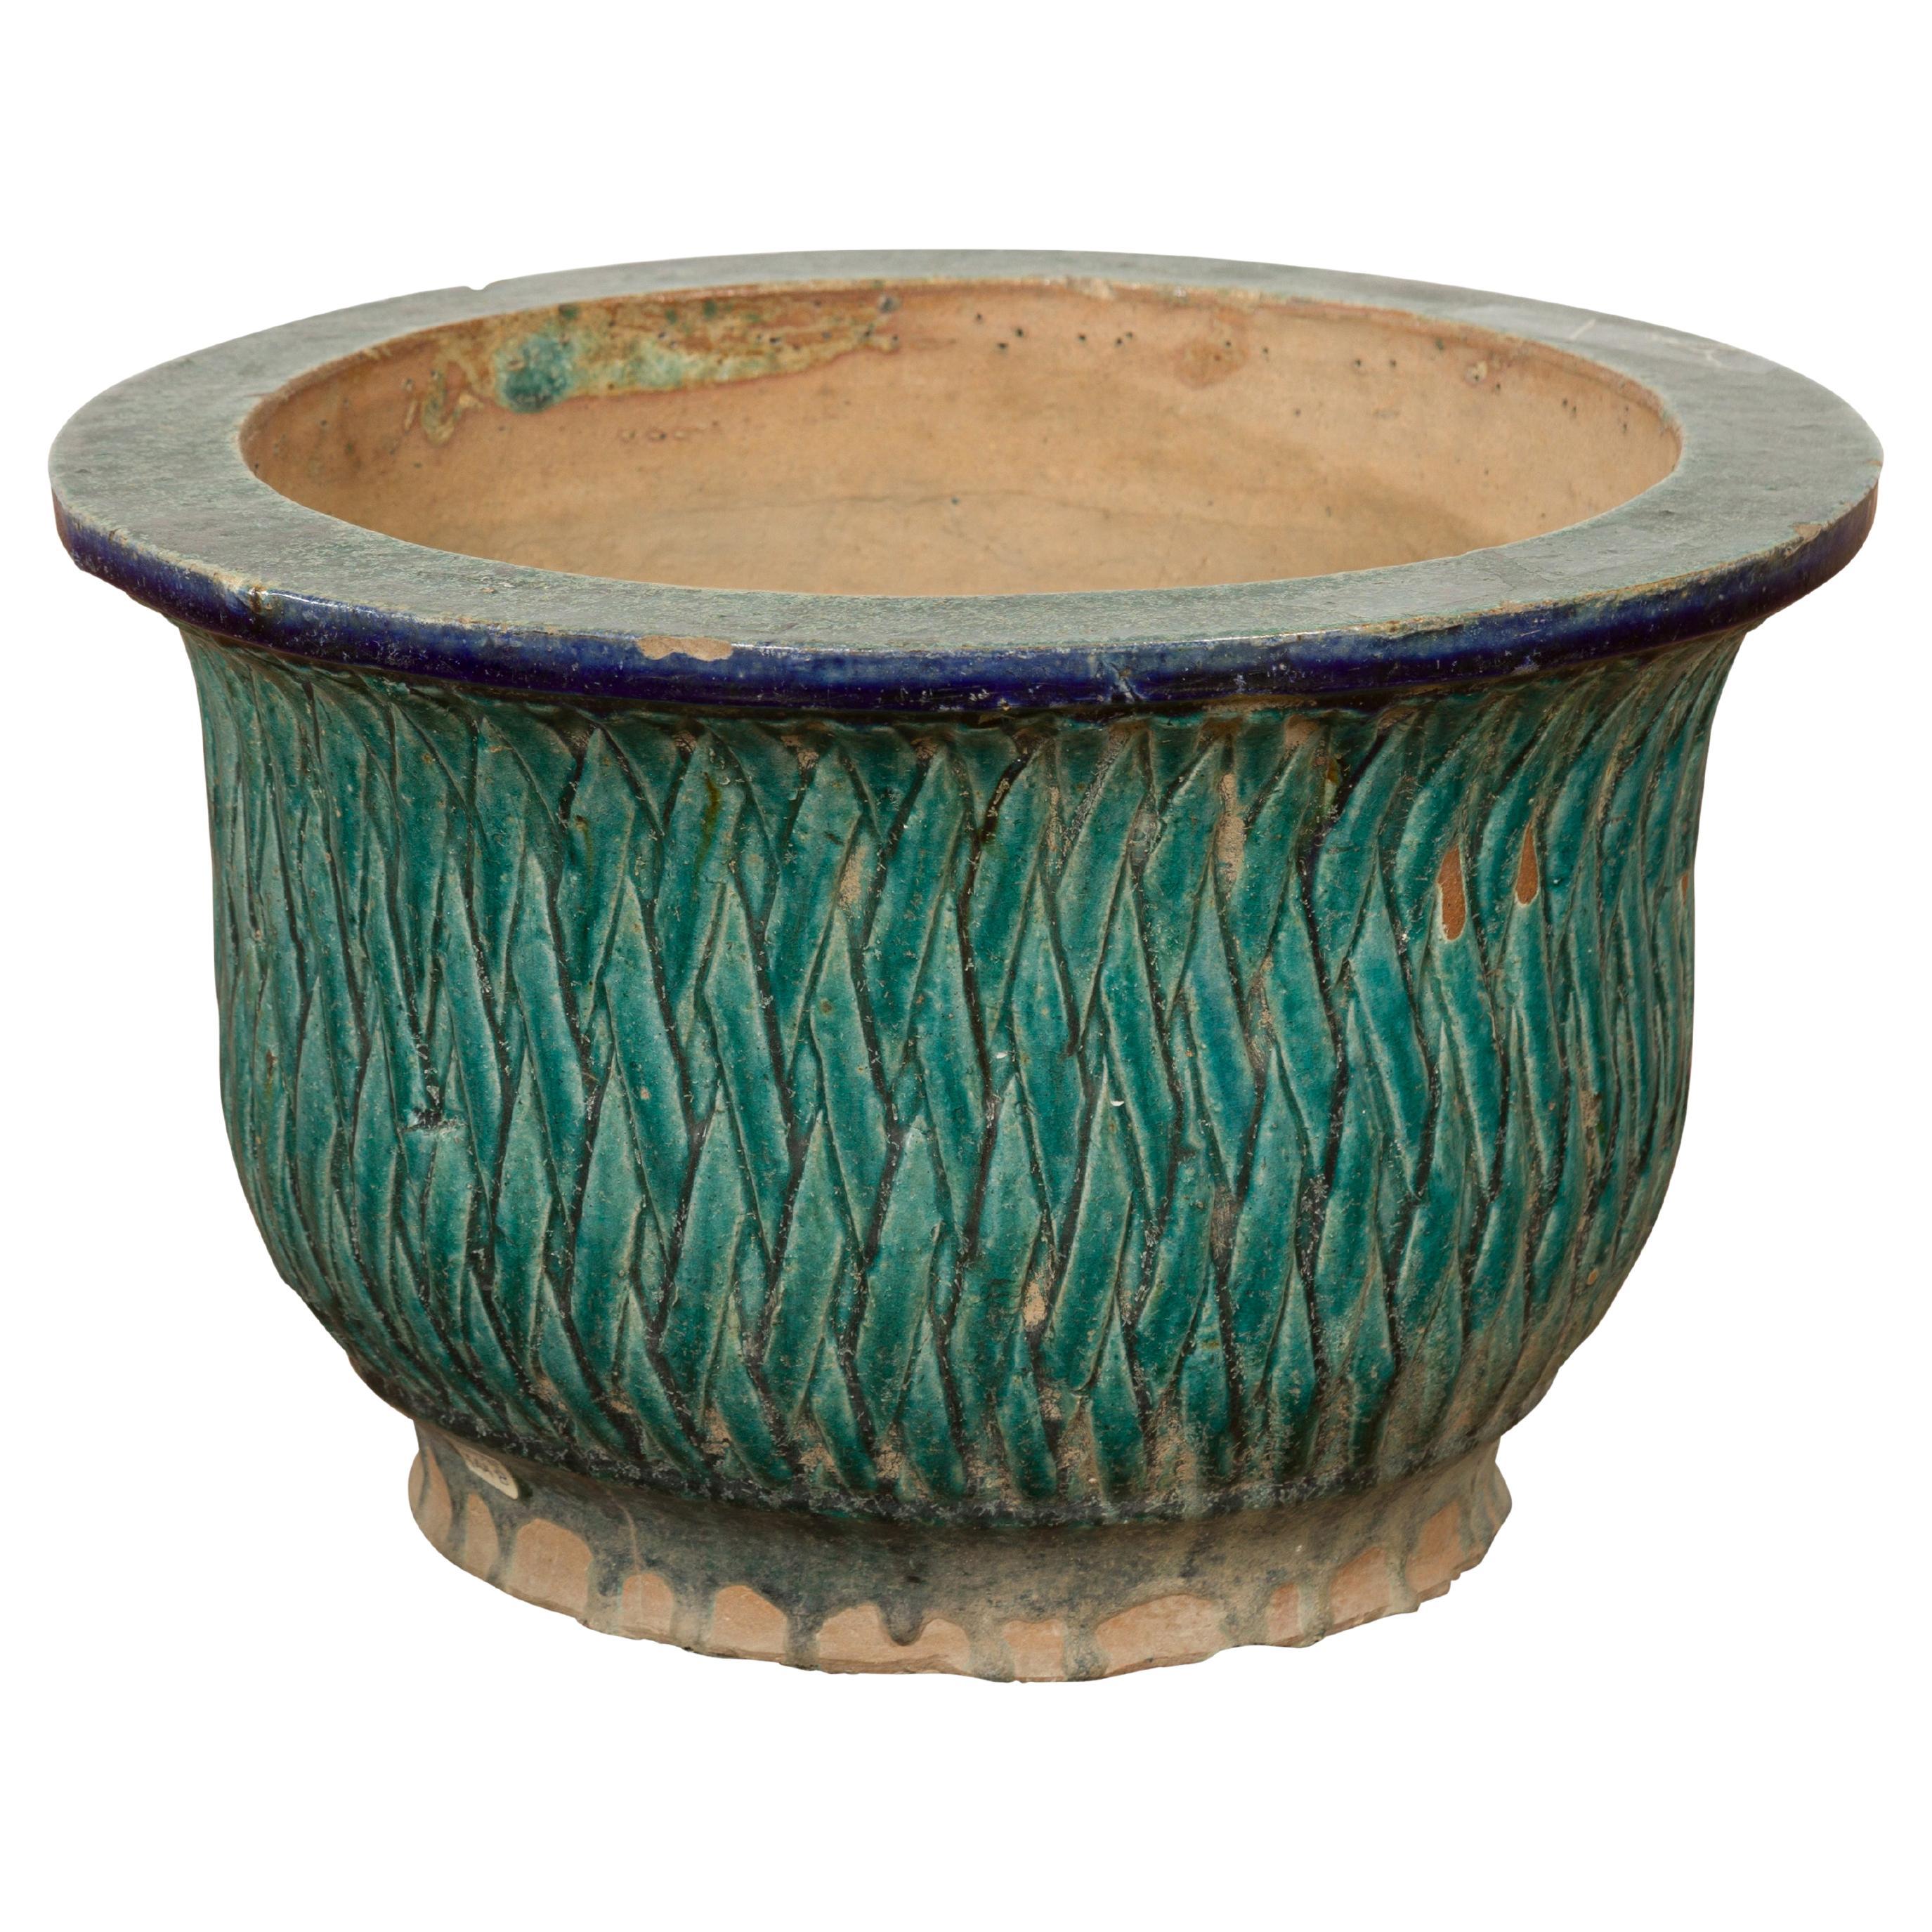 Multi-Glaze Planter with Green and Blue Accents, Qing Dynasty Period